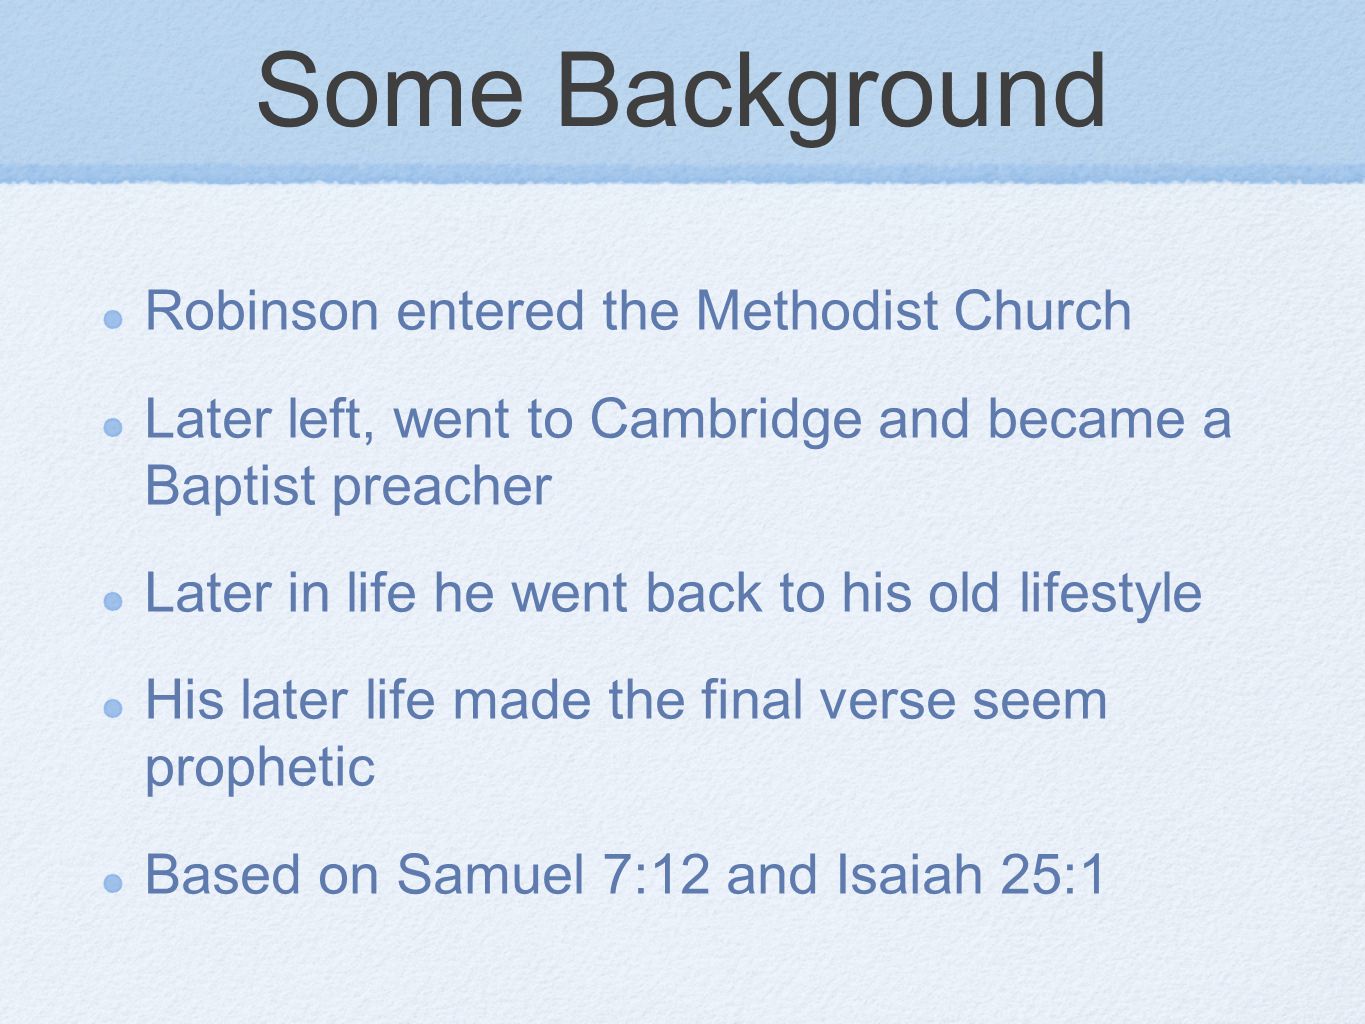 Some Background Robinson entered the Methodist Church Later left, went to Cambridge and became a Baptist preacher Later in life he went back to his old lifestyle His later life made the final verse seem prophetic Based on Samuel 7:12 and Isaiah 25:1